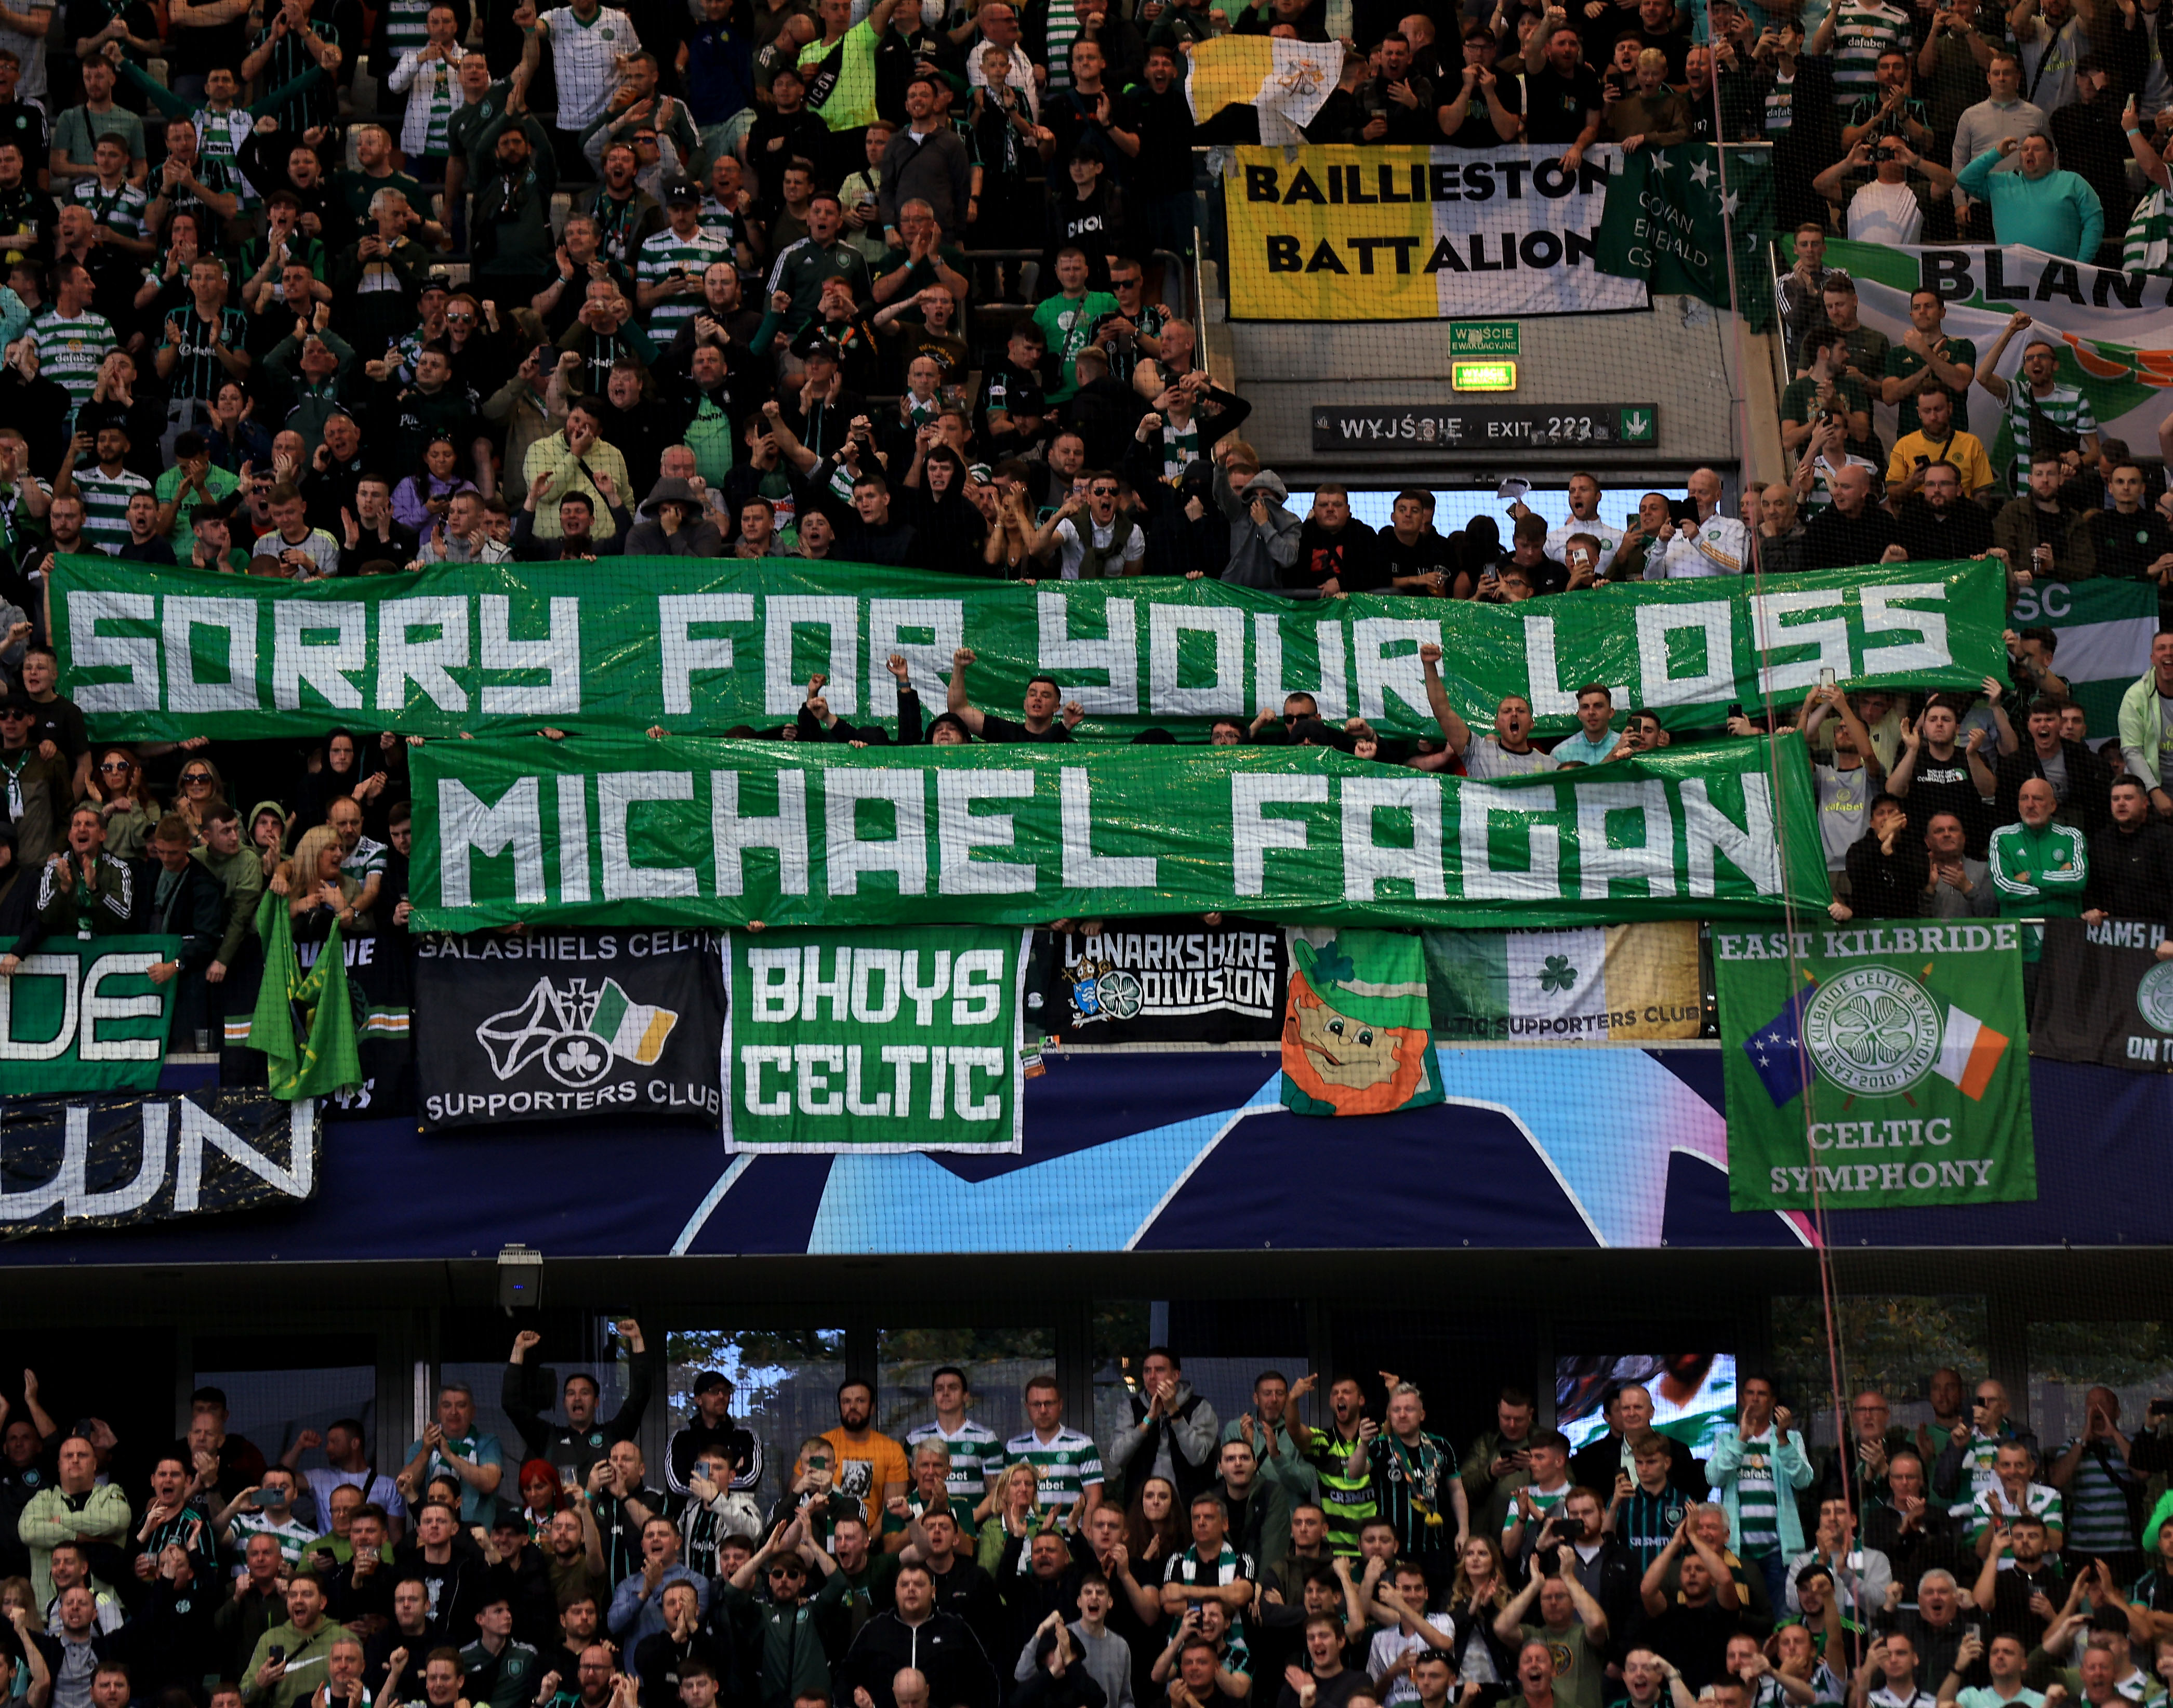 Celtic fans slammed for 'ridiculous, insulting banners' about the Queen – but club SHOULDN'T be punished says pundit | The Scottish Sun